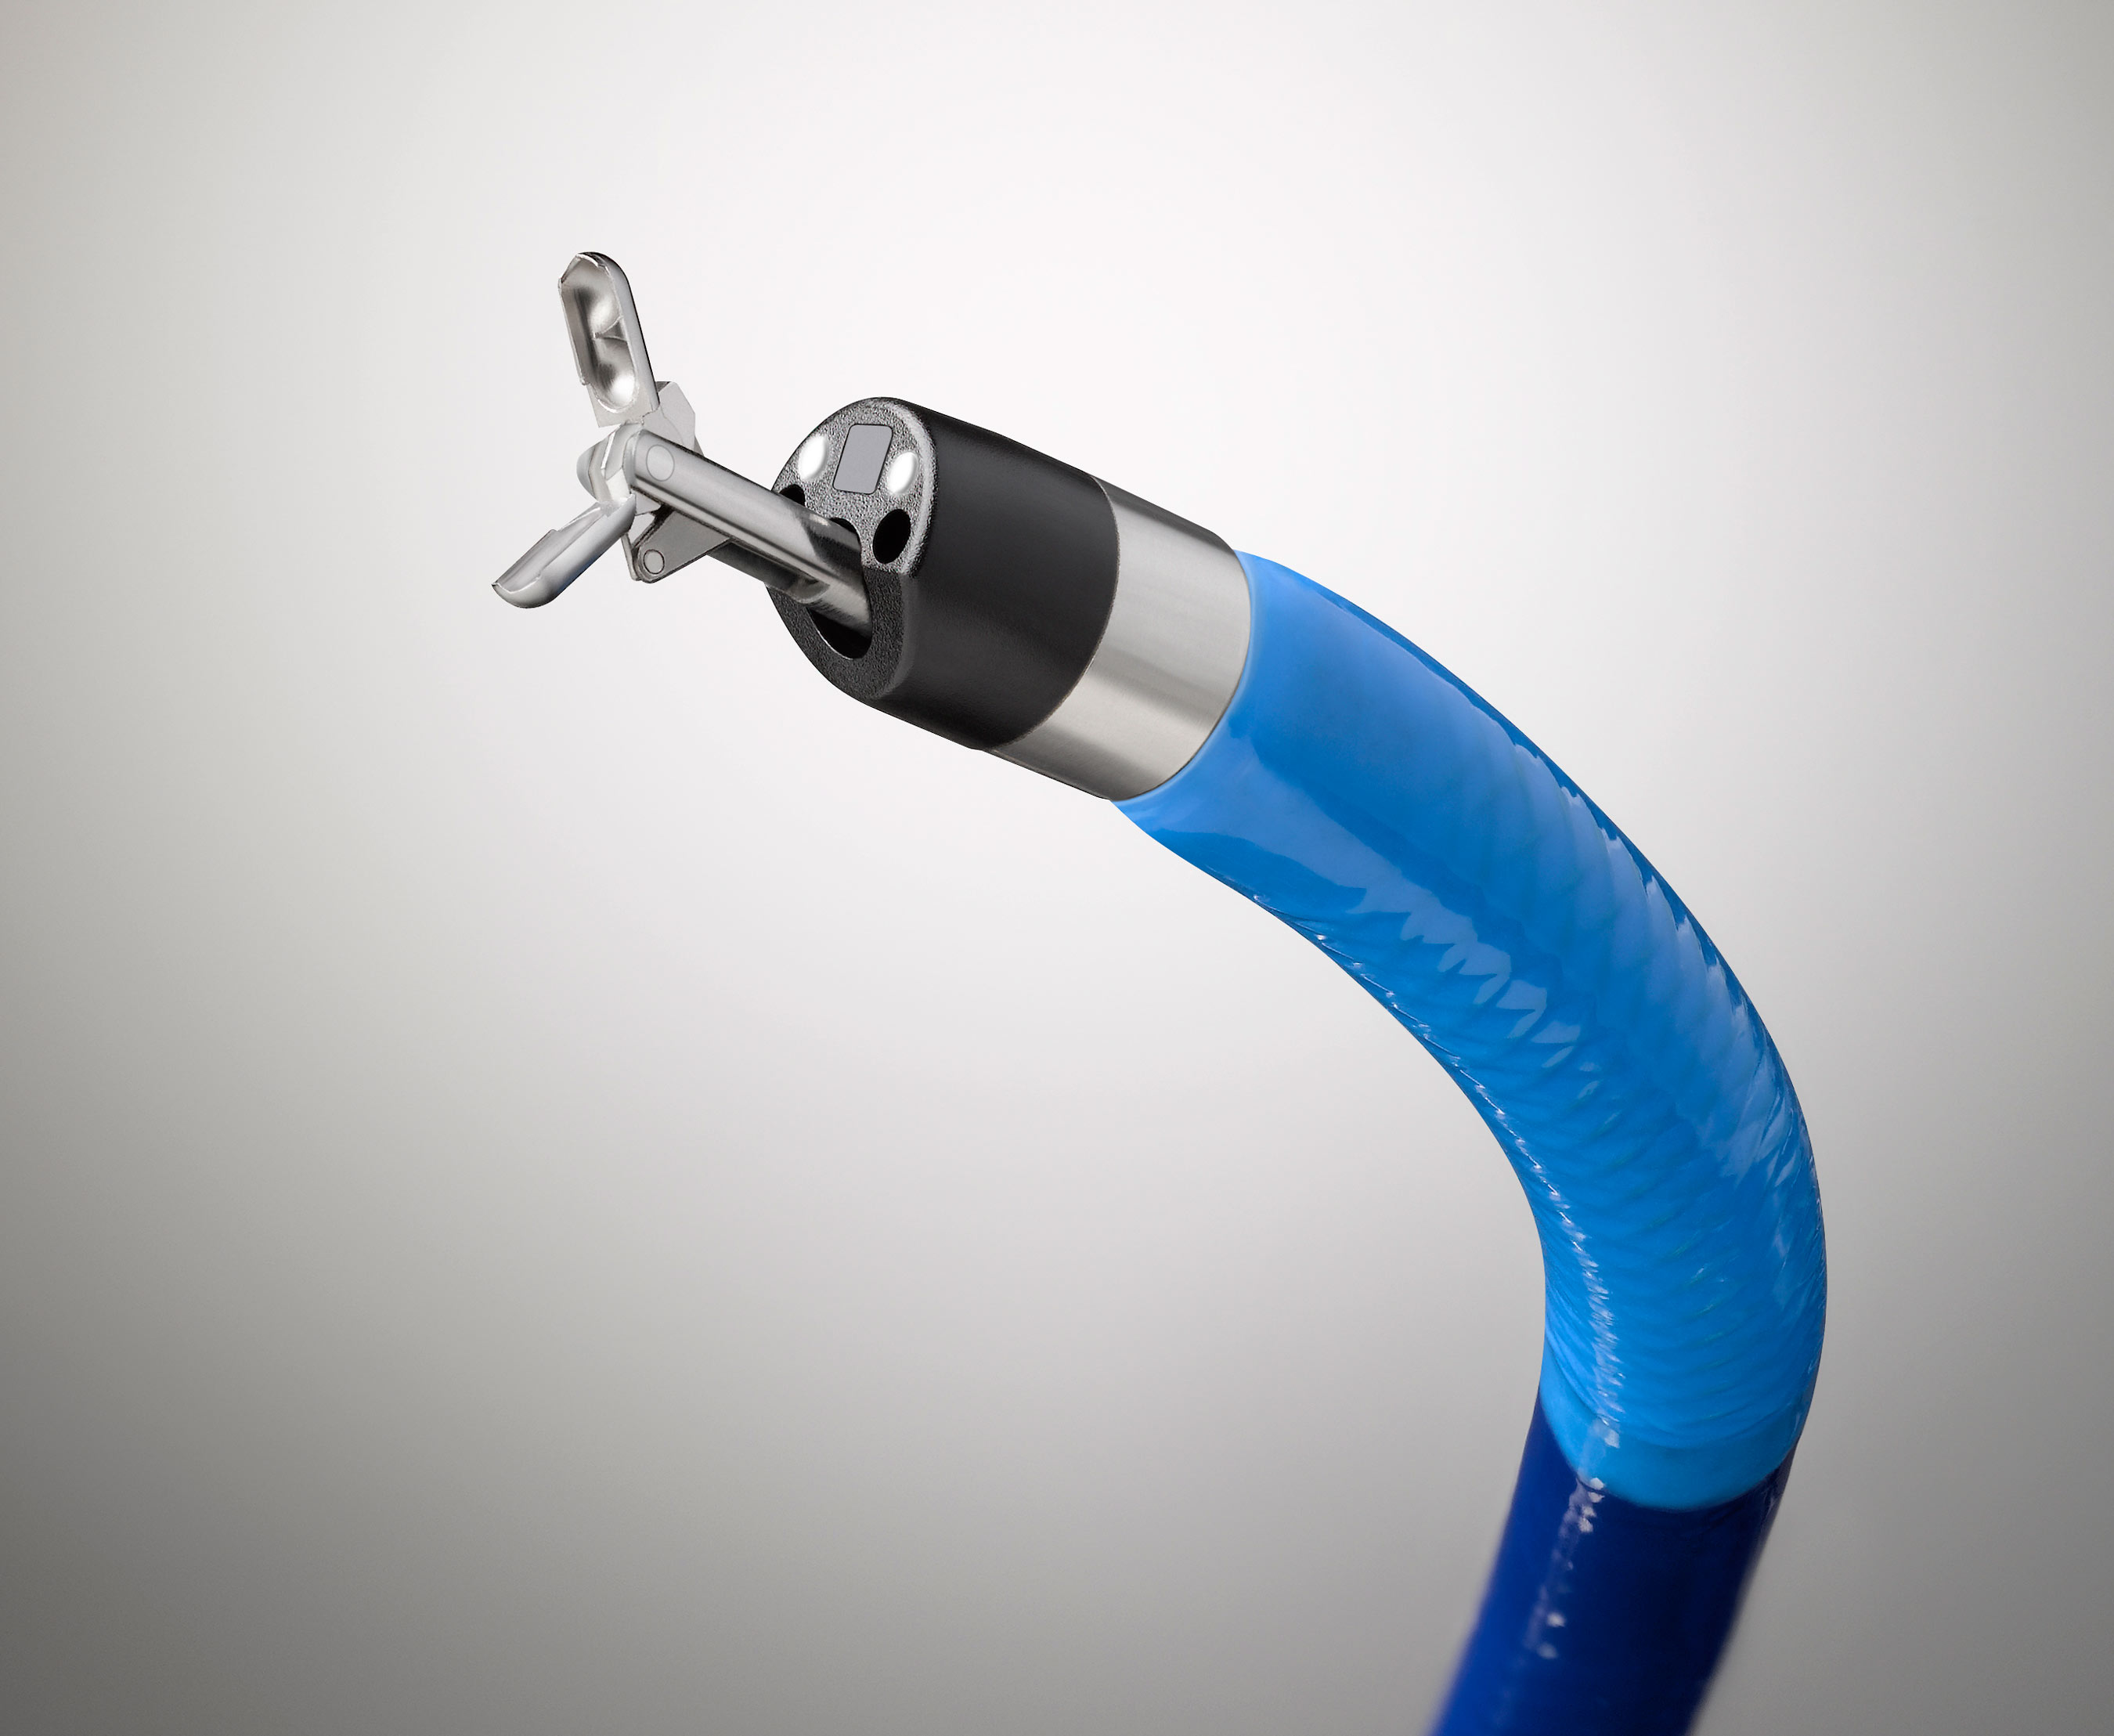 The single use SpyScope™ DS Catheter Tip includes built in optical sensor, 2 LED lights, 2 irrigation channels and a therapeutic channel for passing accessories, such as the SpyBite™ Forceps.